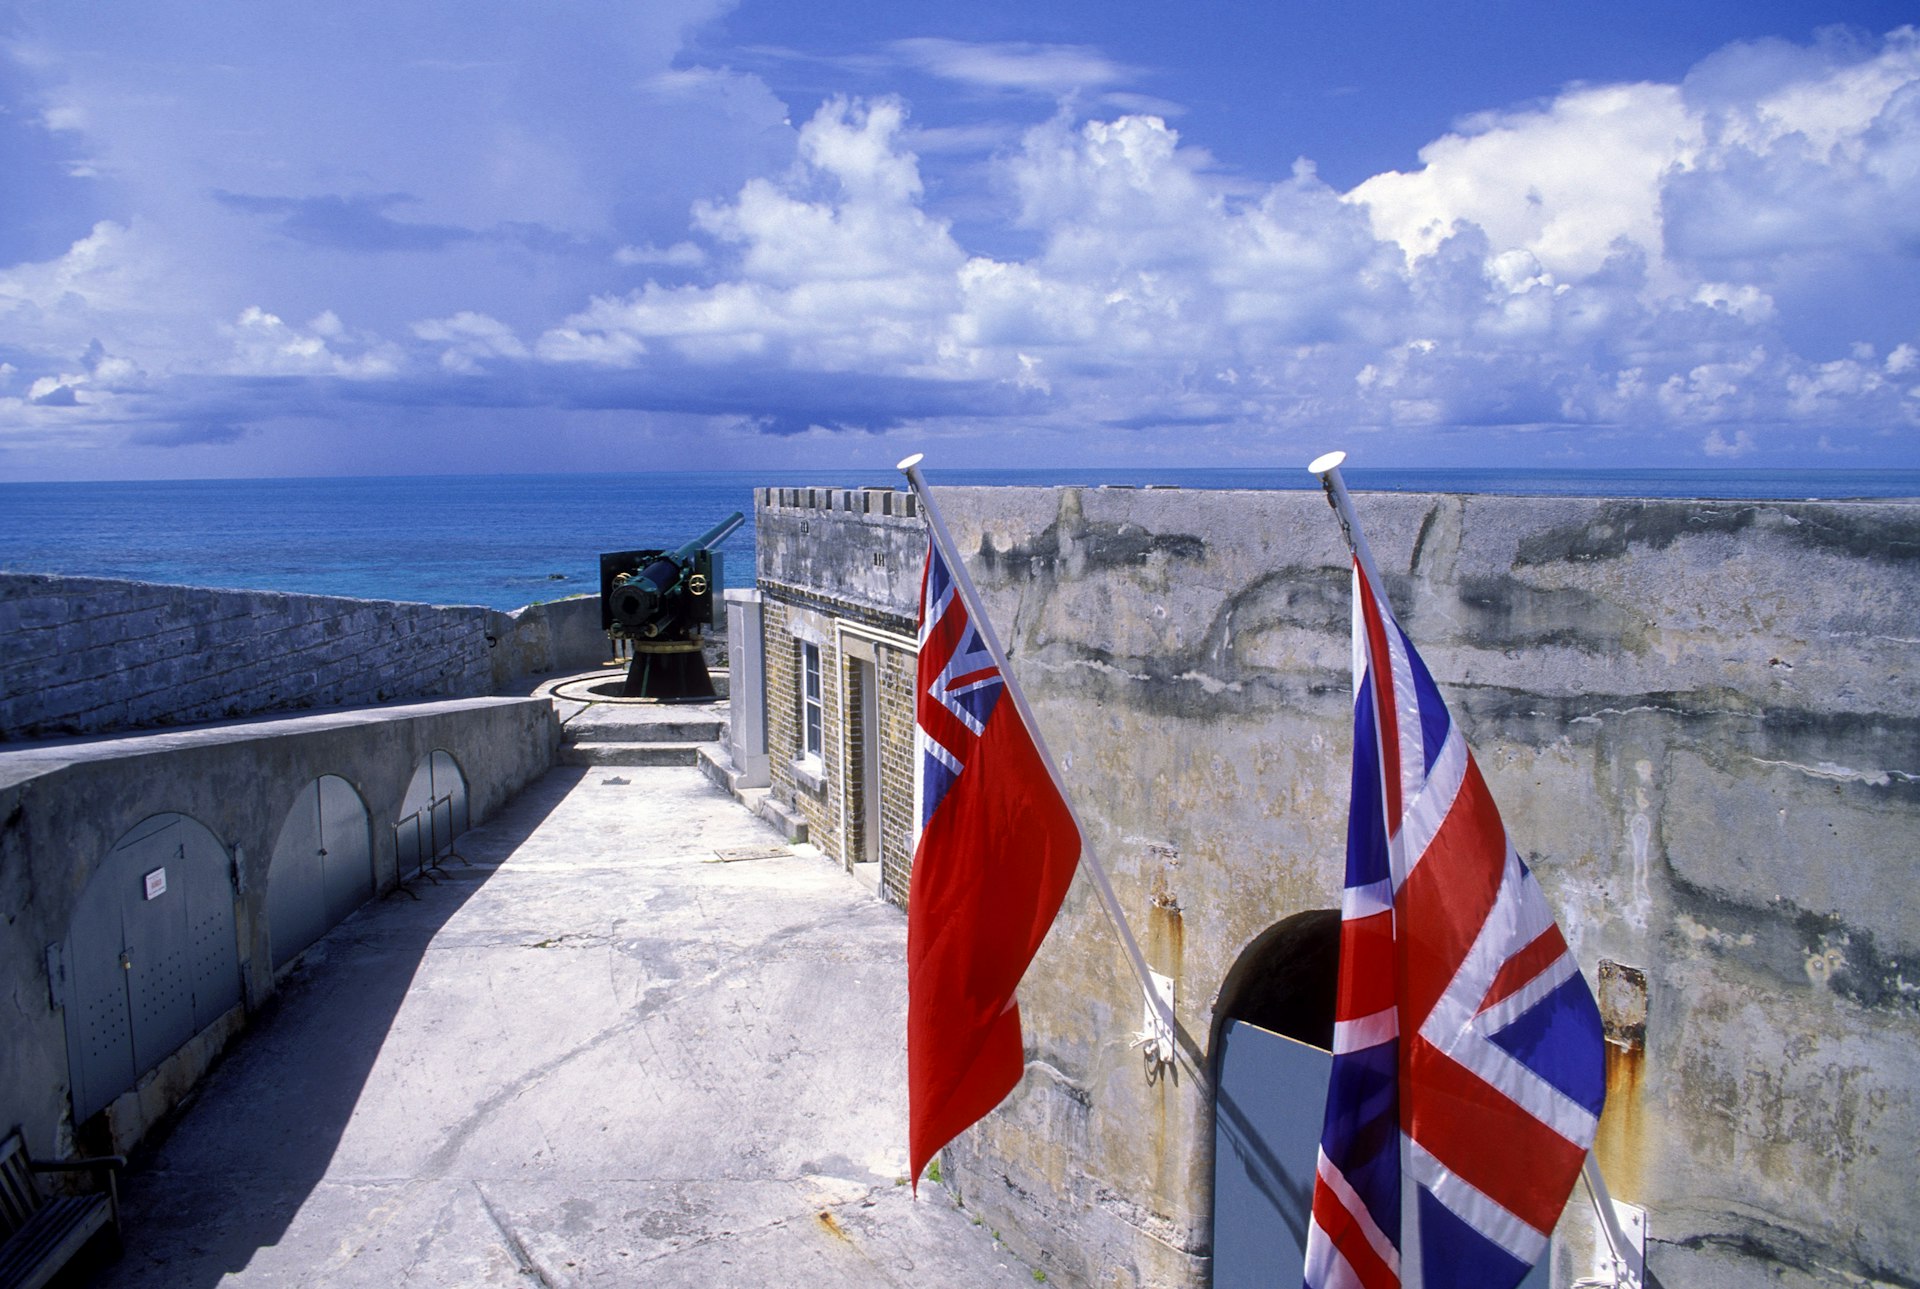 Flags on Fort St Catherine on the island of Bermuda